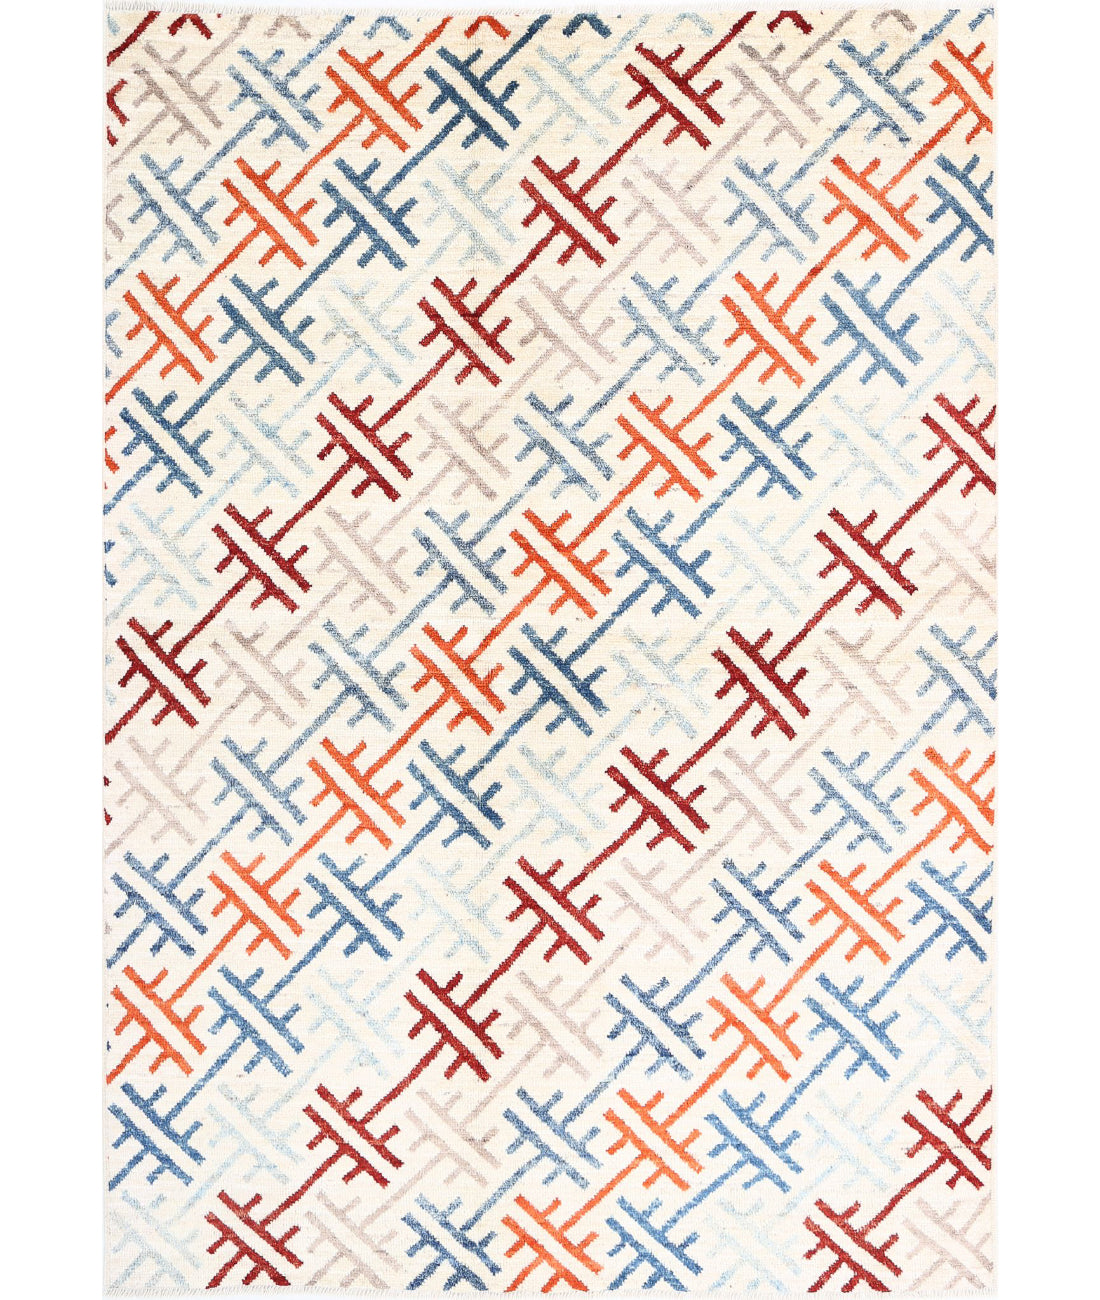 Hand Knotted Modcar Wool Rug - 5'8'' x 8'1'' 5'8'' x 8'1'' (170 X 243) / Ivory / Blue